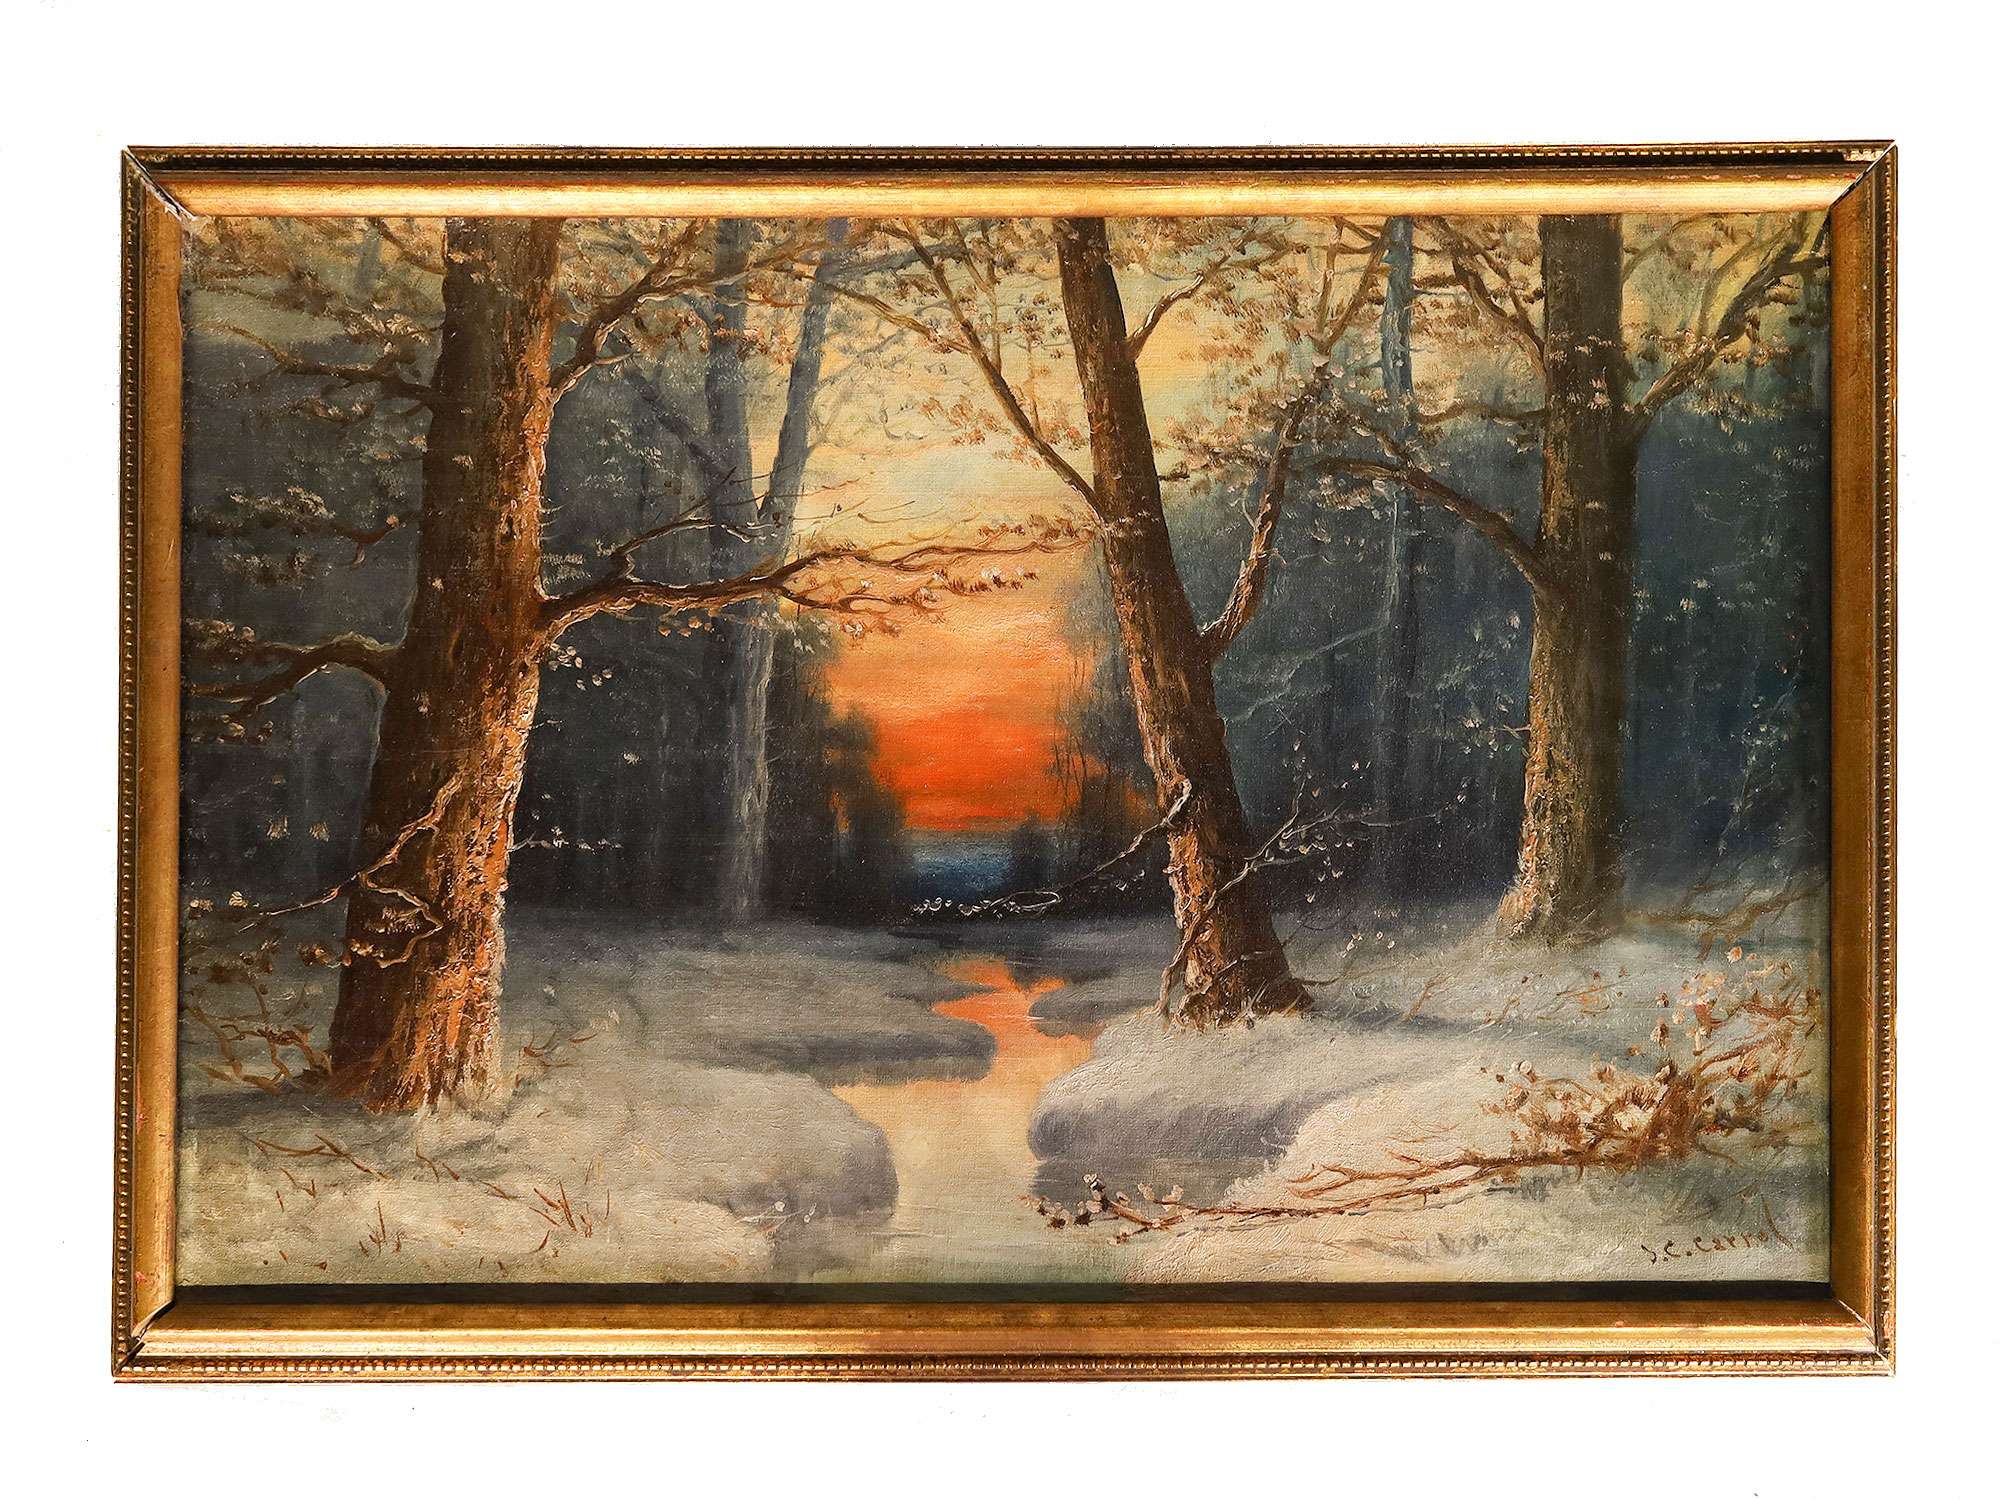 ANTIQUE LANDSCAPE OIL PAINTING SIGNED BY J C CARROL PIC-0